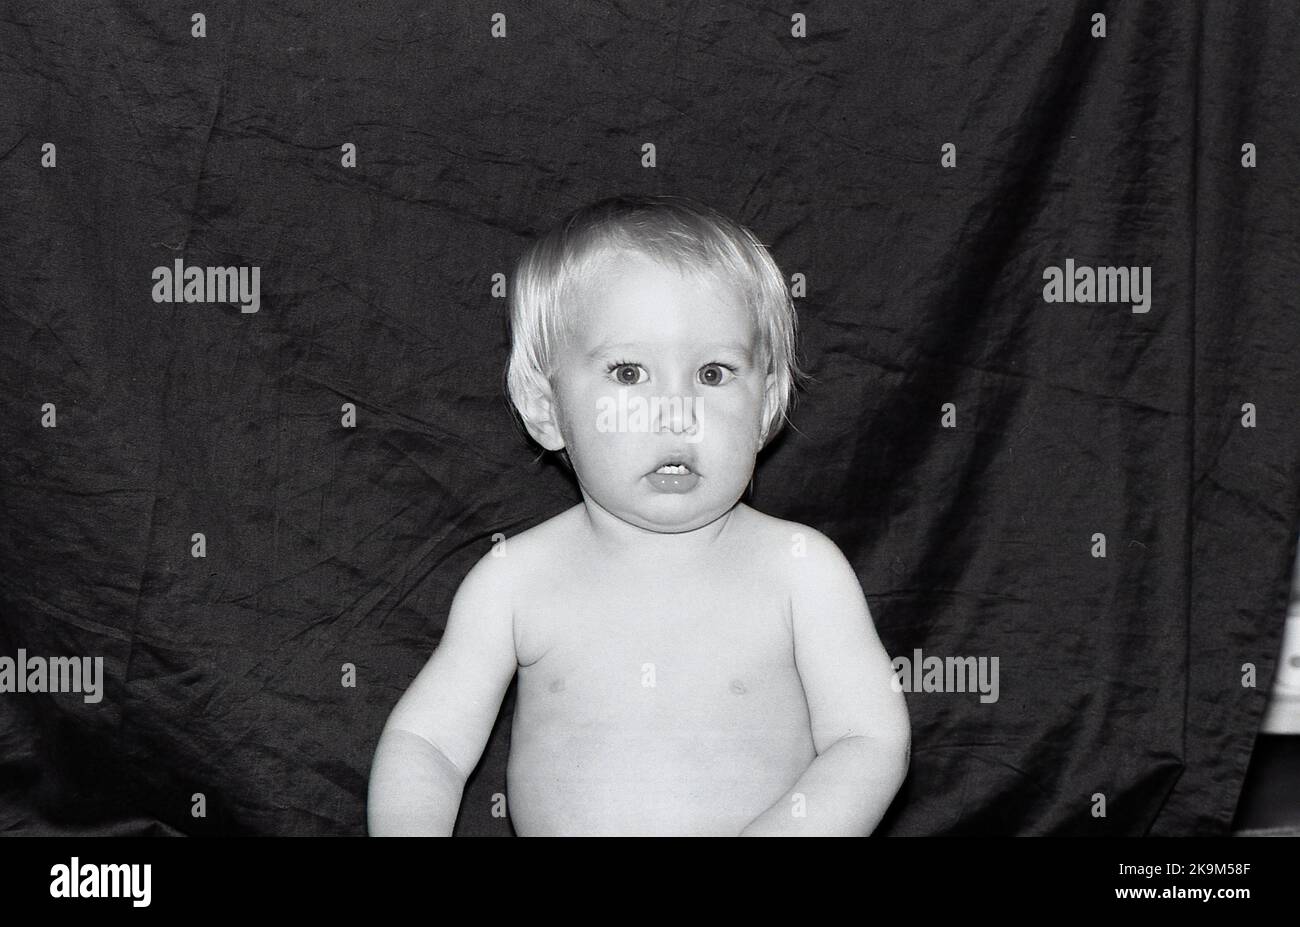 Portrait of a one year old baby boy against a dark background. Stock Photo